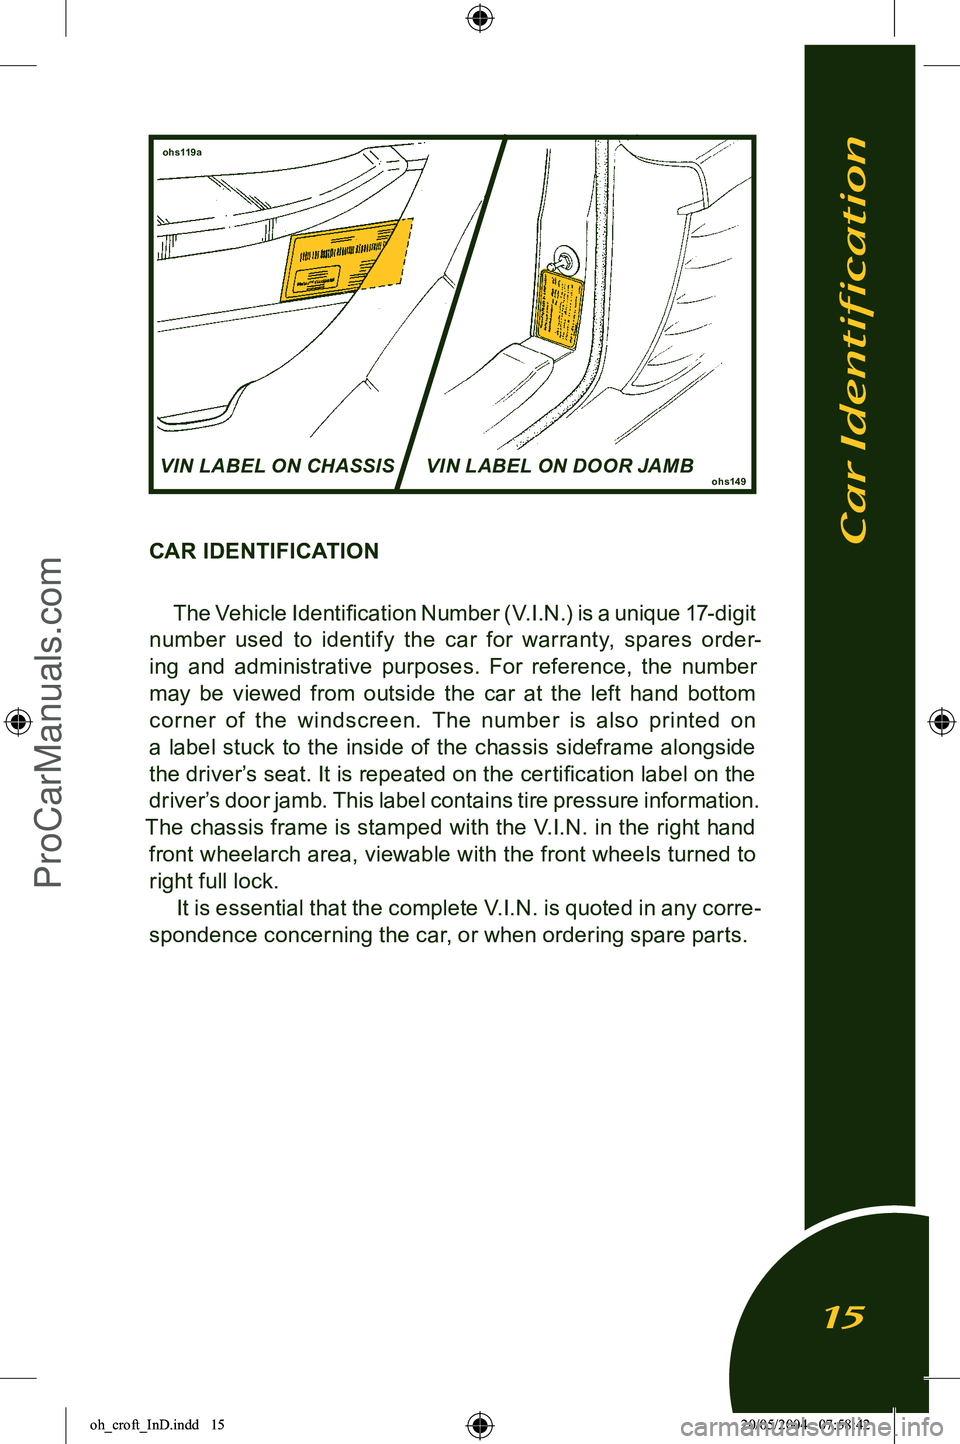 LOTUS ELISE 2005  Owners Manual 
CAR IDENTIFICATIONThe Vehicle Identiﬁcation Number (V.I.N.) is a unique 17-digit 
number  used  to  identify  the  car  for  warranty,  spares  order
-
ing  and  administrative  purposes.  For  ref